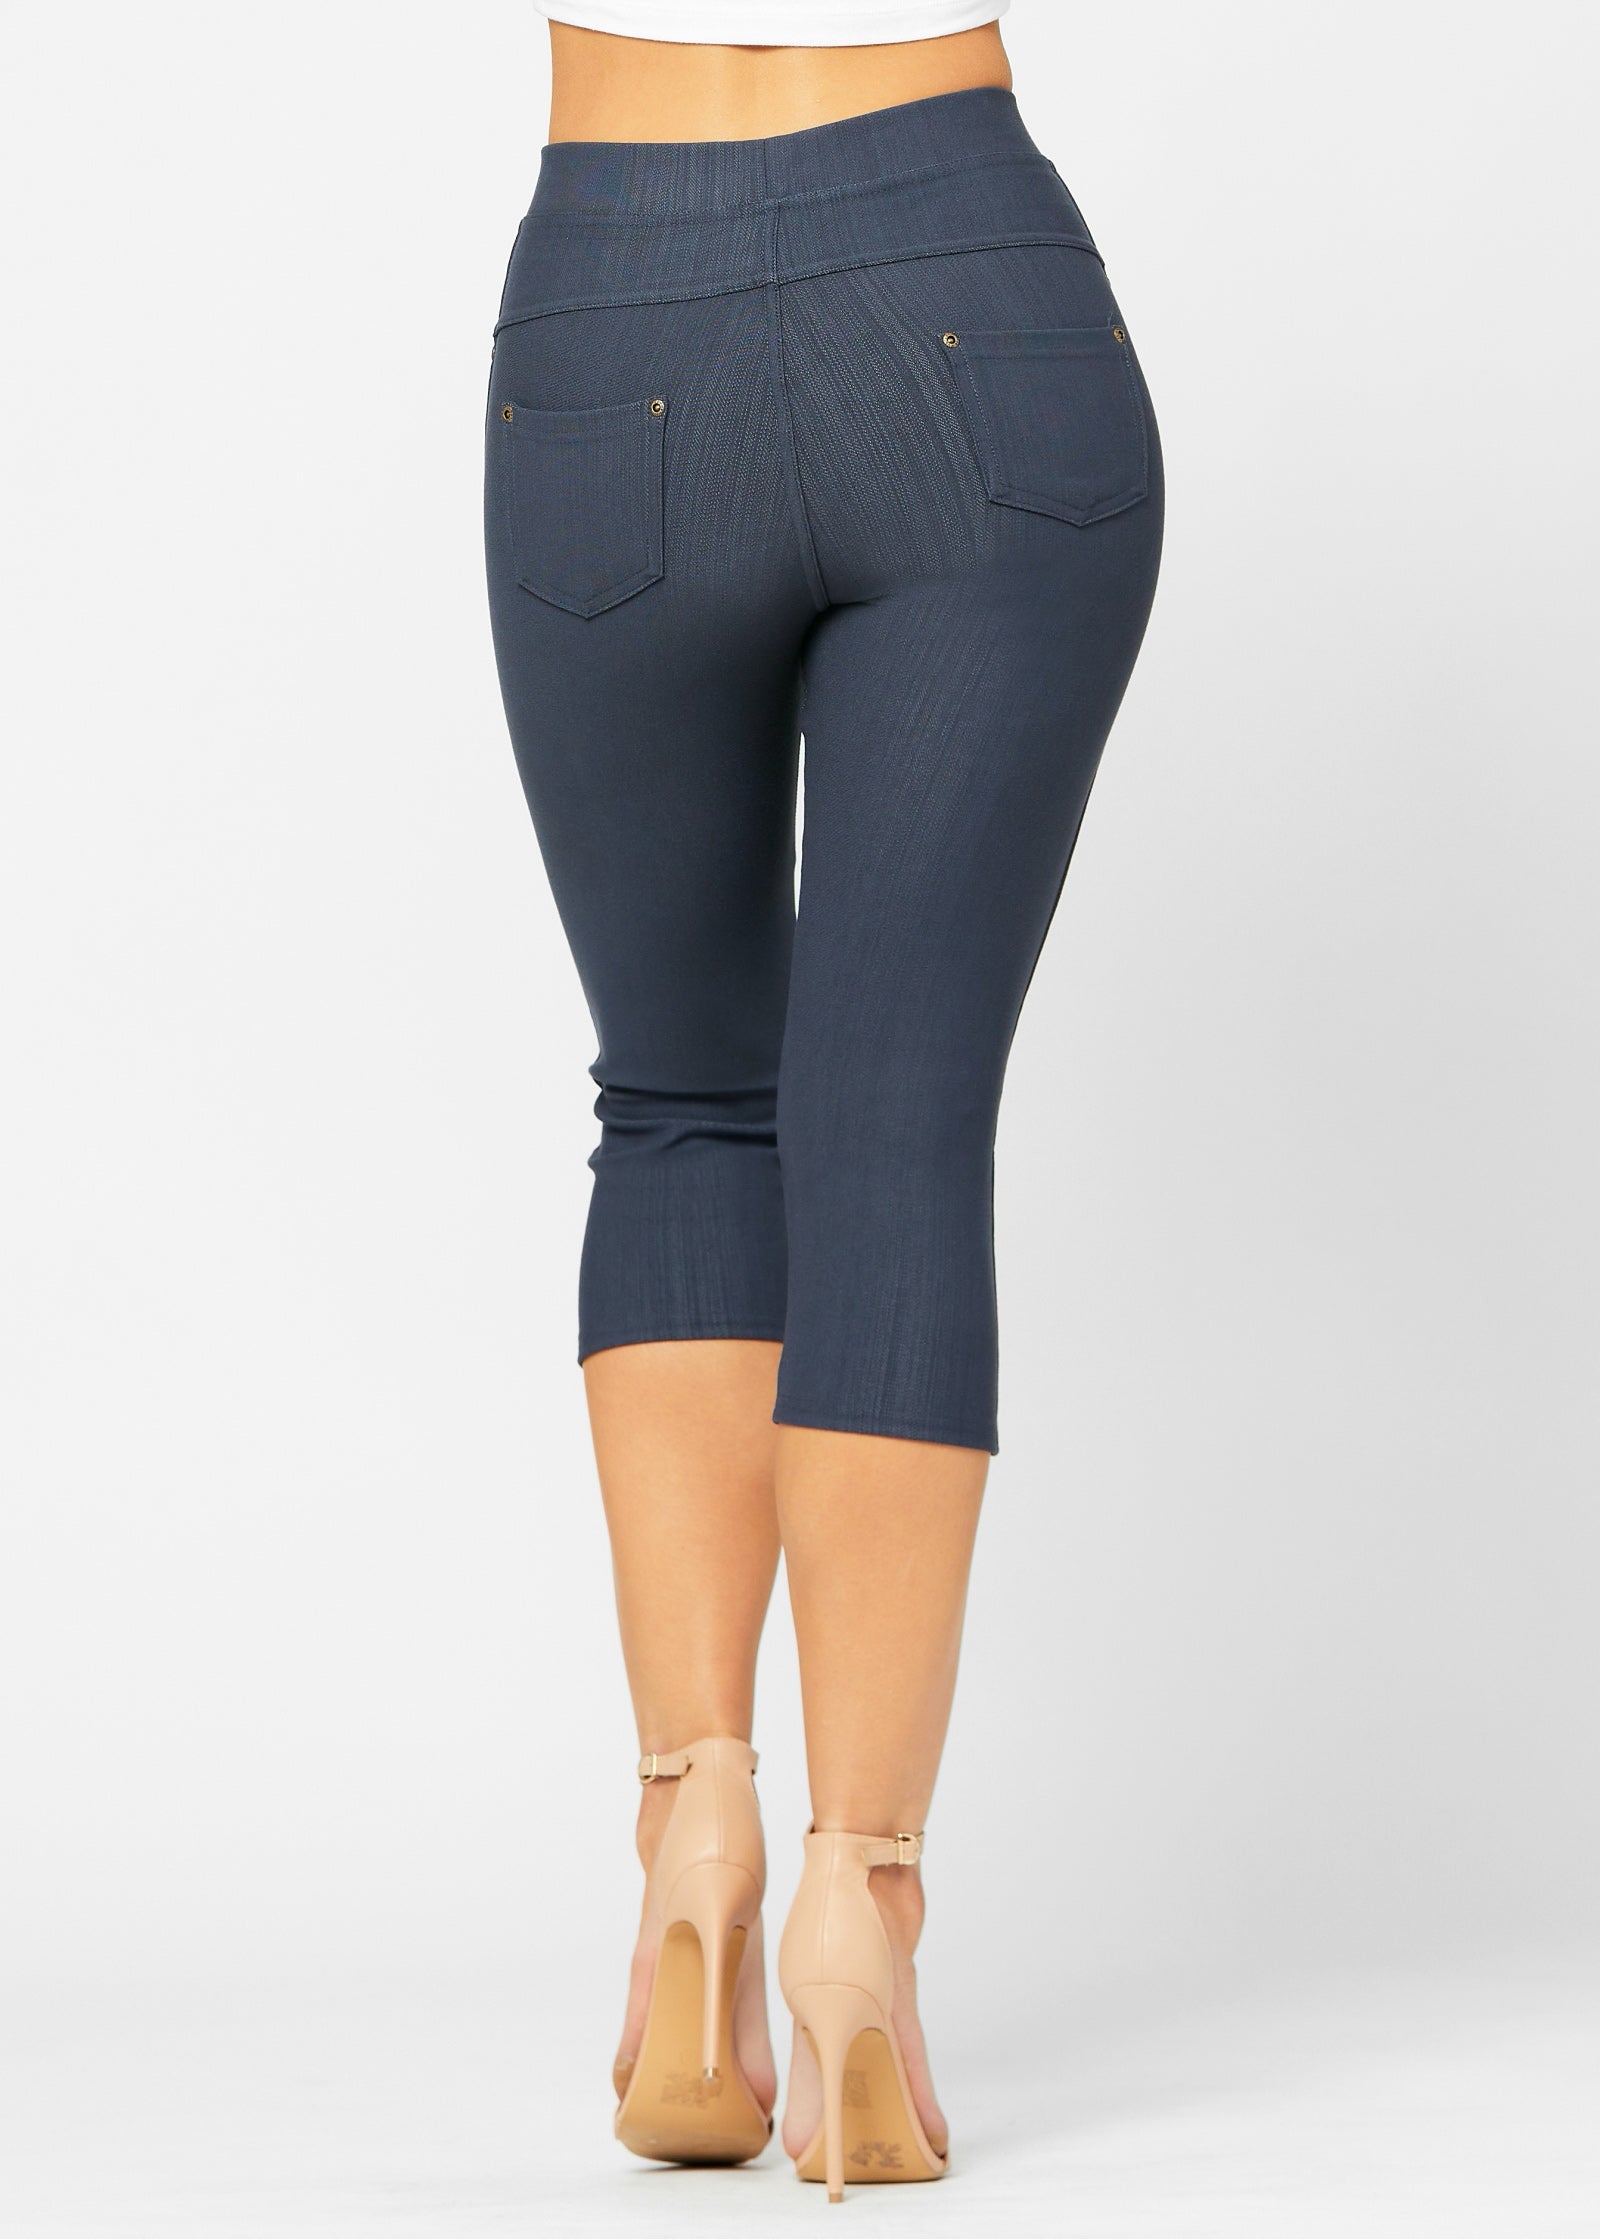 Women's New Mix Brand Capri Jeggings. - 1 Elastic Waistband - Pull-On  Styling - Two Functional Back Pockets - Soft, Smooth & Stretch Material - ONE  SIZE FITS MOST 0-14 - Inseam